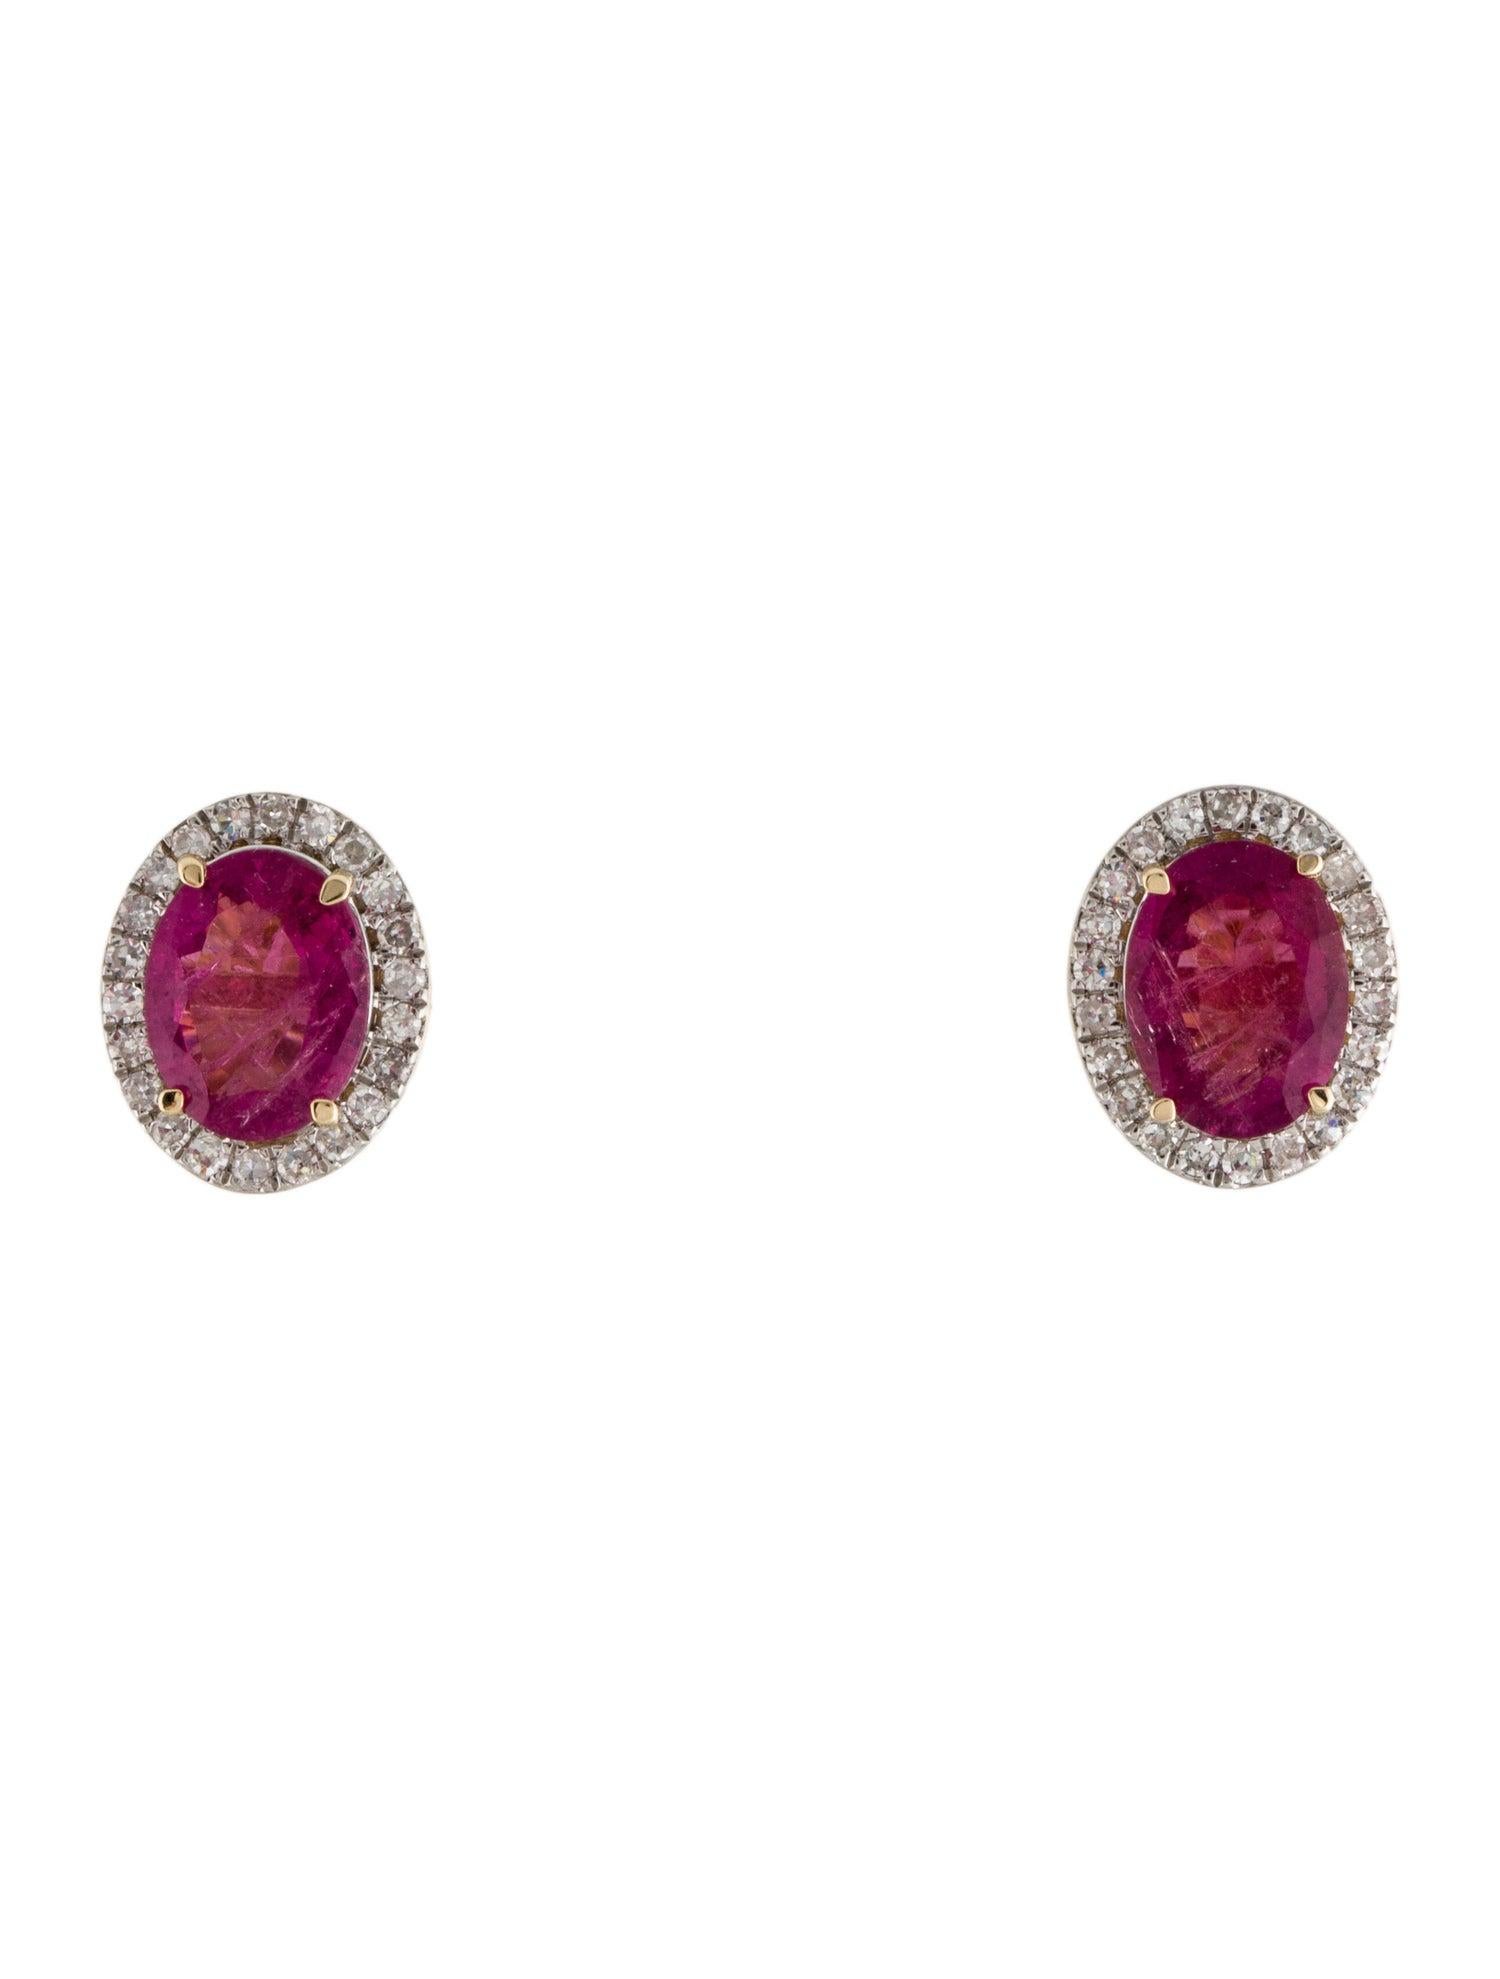 Sparkling 14K Tourmaline & Diamond Stud Earrings - Exquisite Gemstone Jewelry In New Condition For Sale In Holtsville, NY